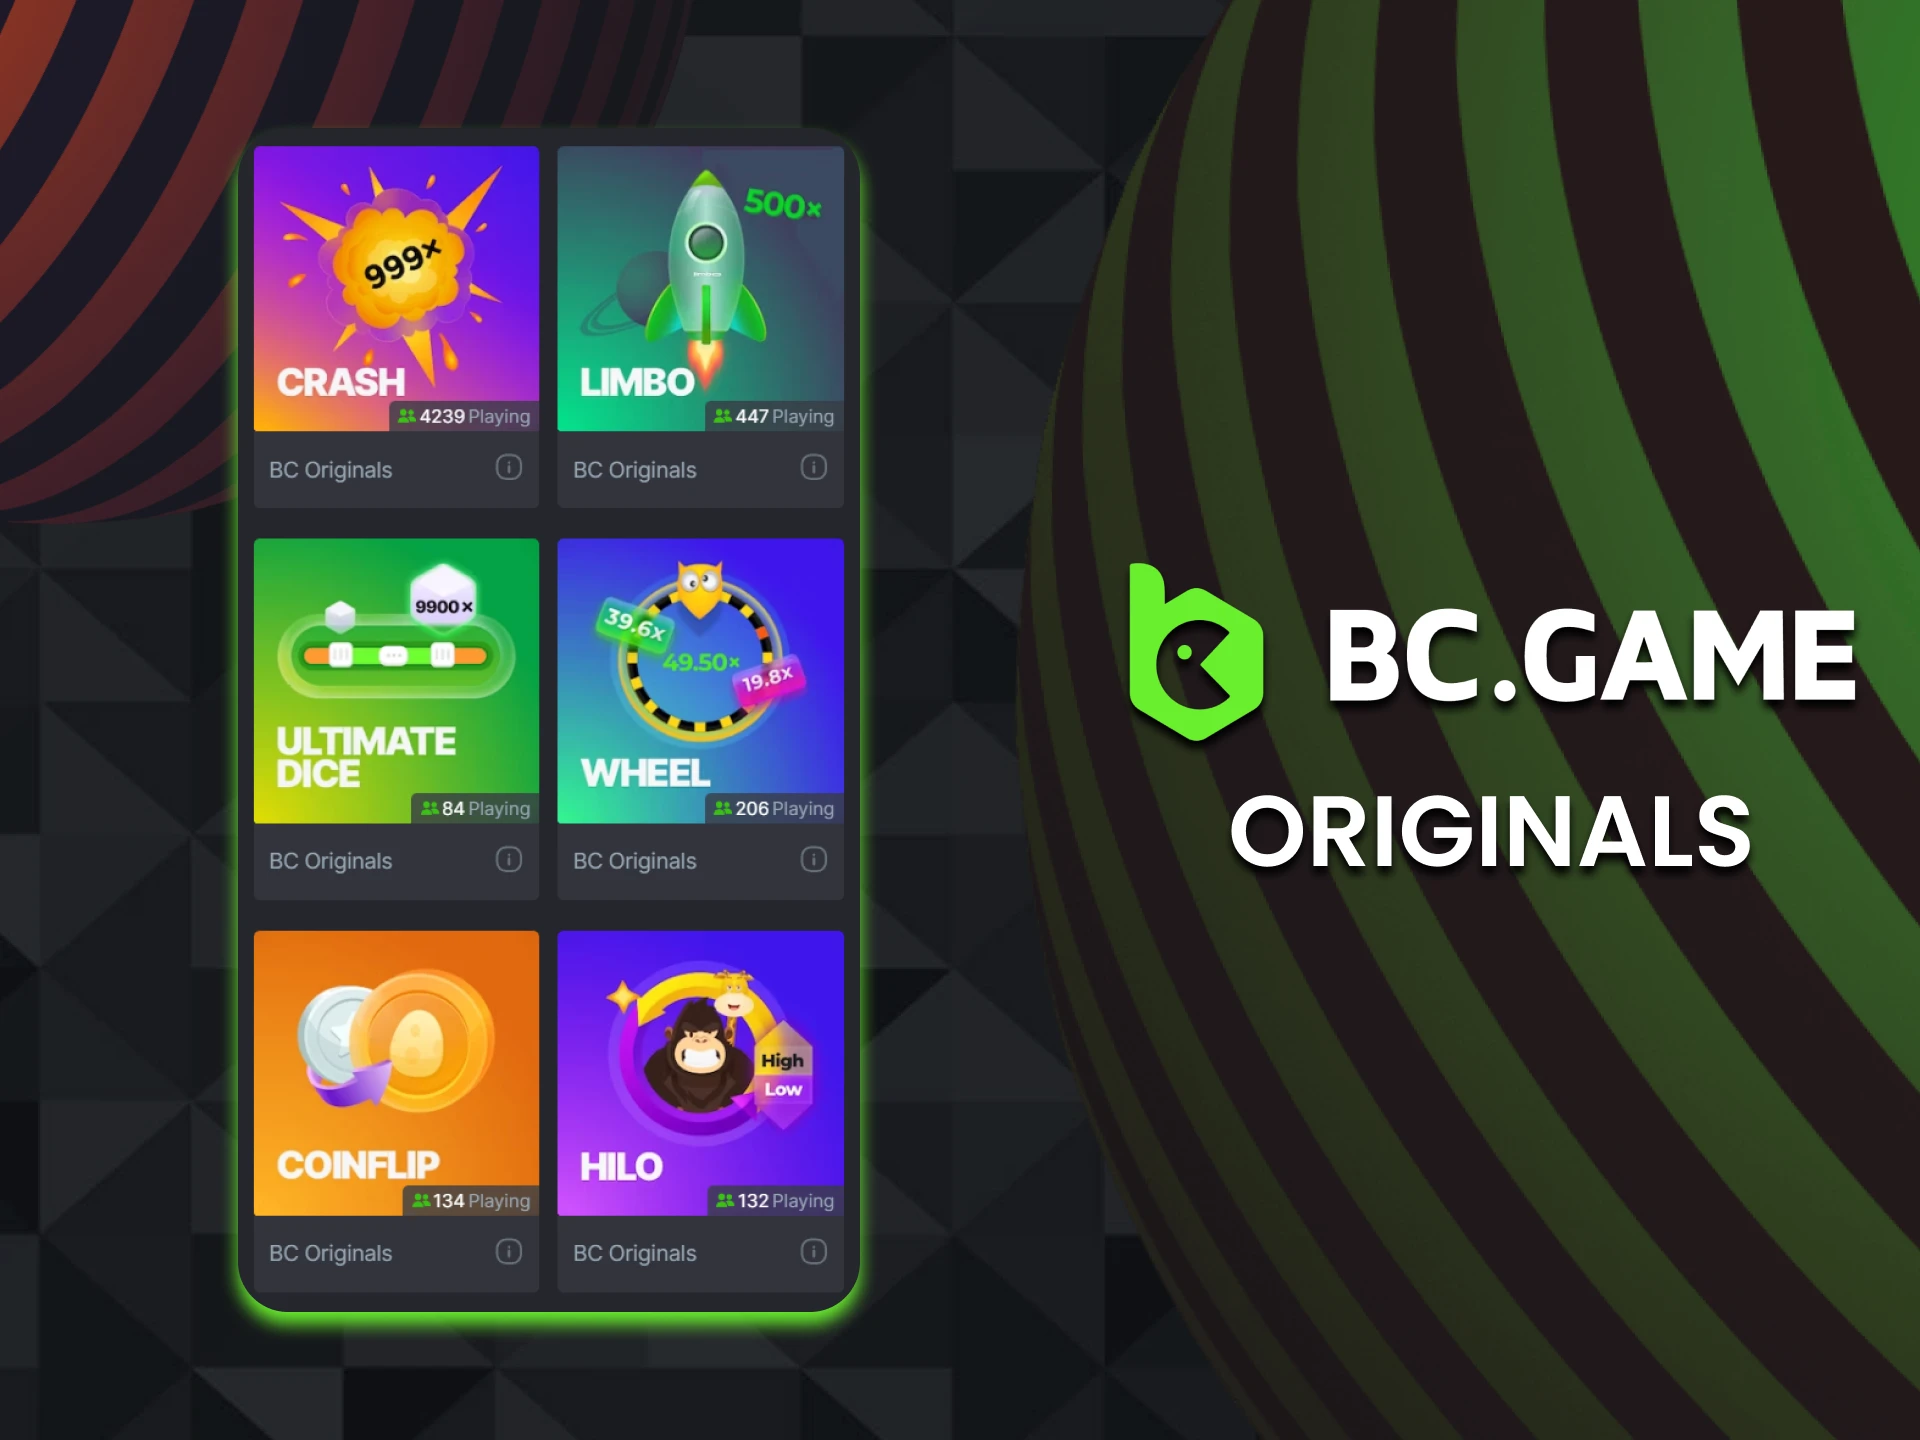 Play Original games developed by BC Game casino itself.